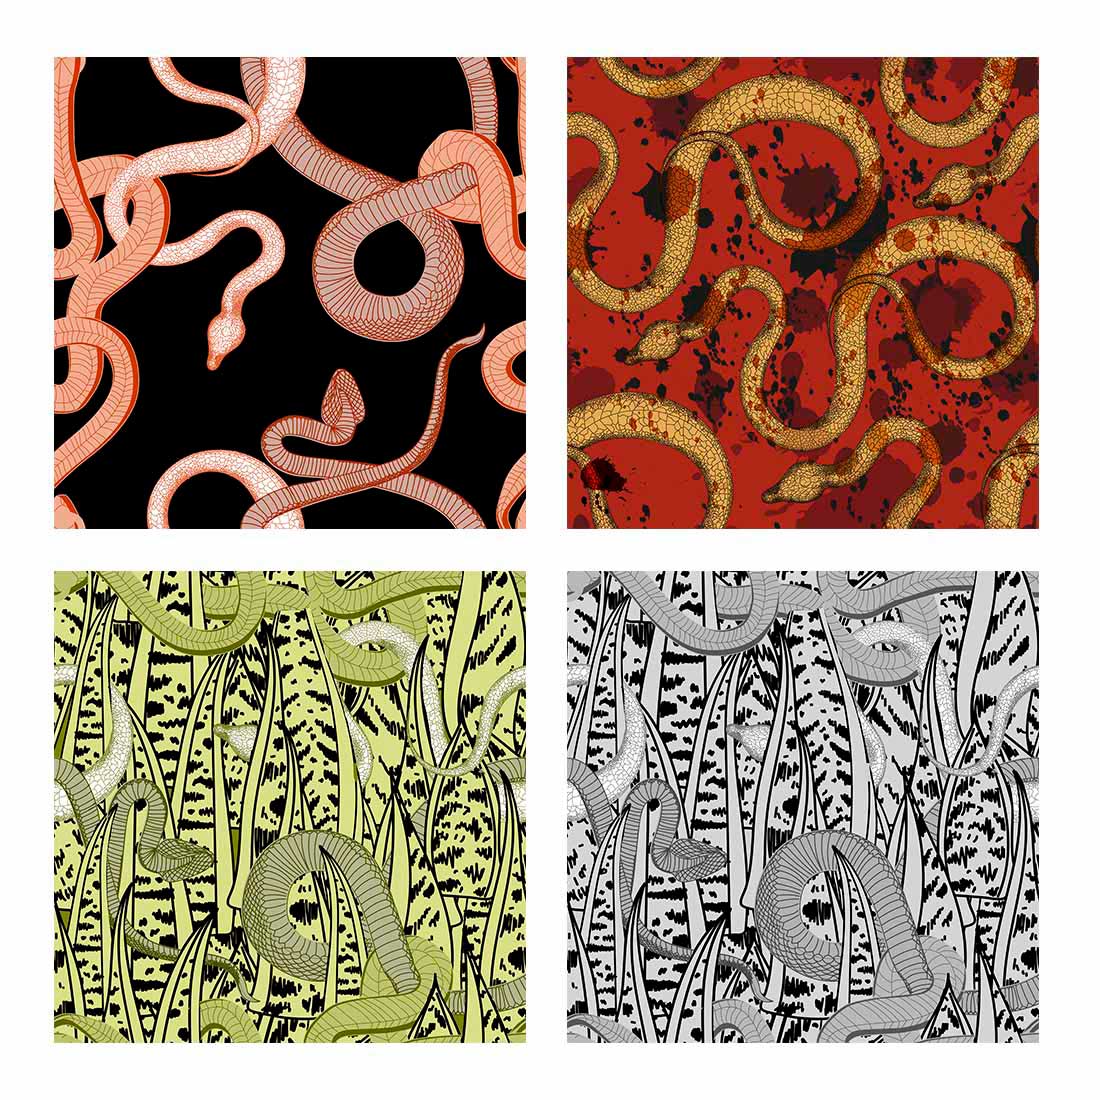 Set of images of colorful patterns with a snake.